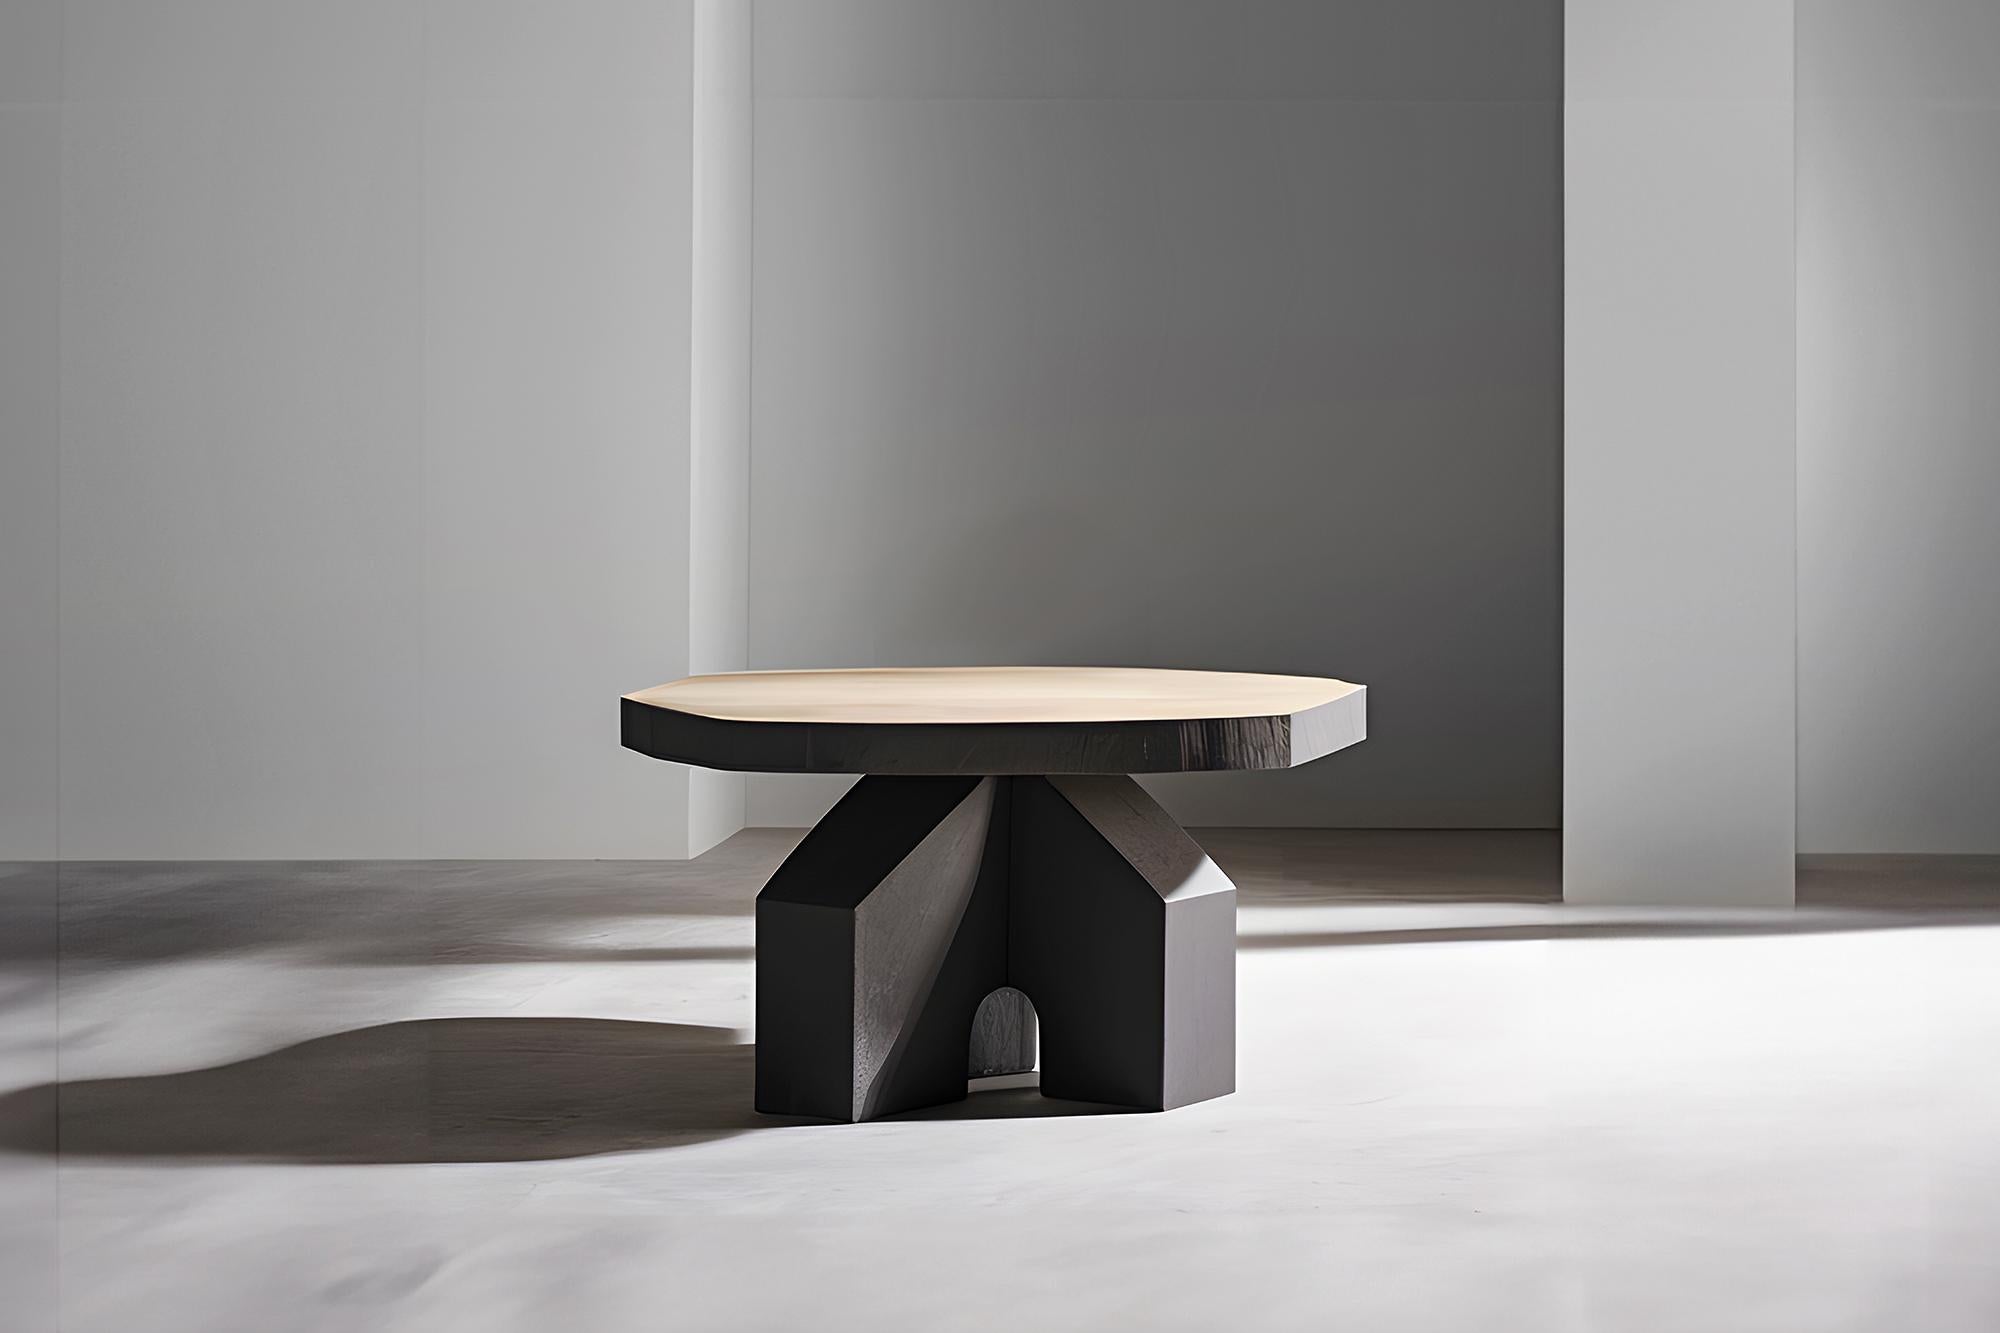 Fundamenta Coffee Table 47 Solid Wood, Geometric Lines by NONO


Sculptural coffee table made of solid wood with a natural water-based or black tinted finish. Due to the nature of the production process, each piece may vary in grain, texture, shape